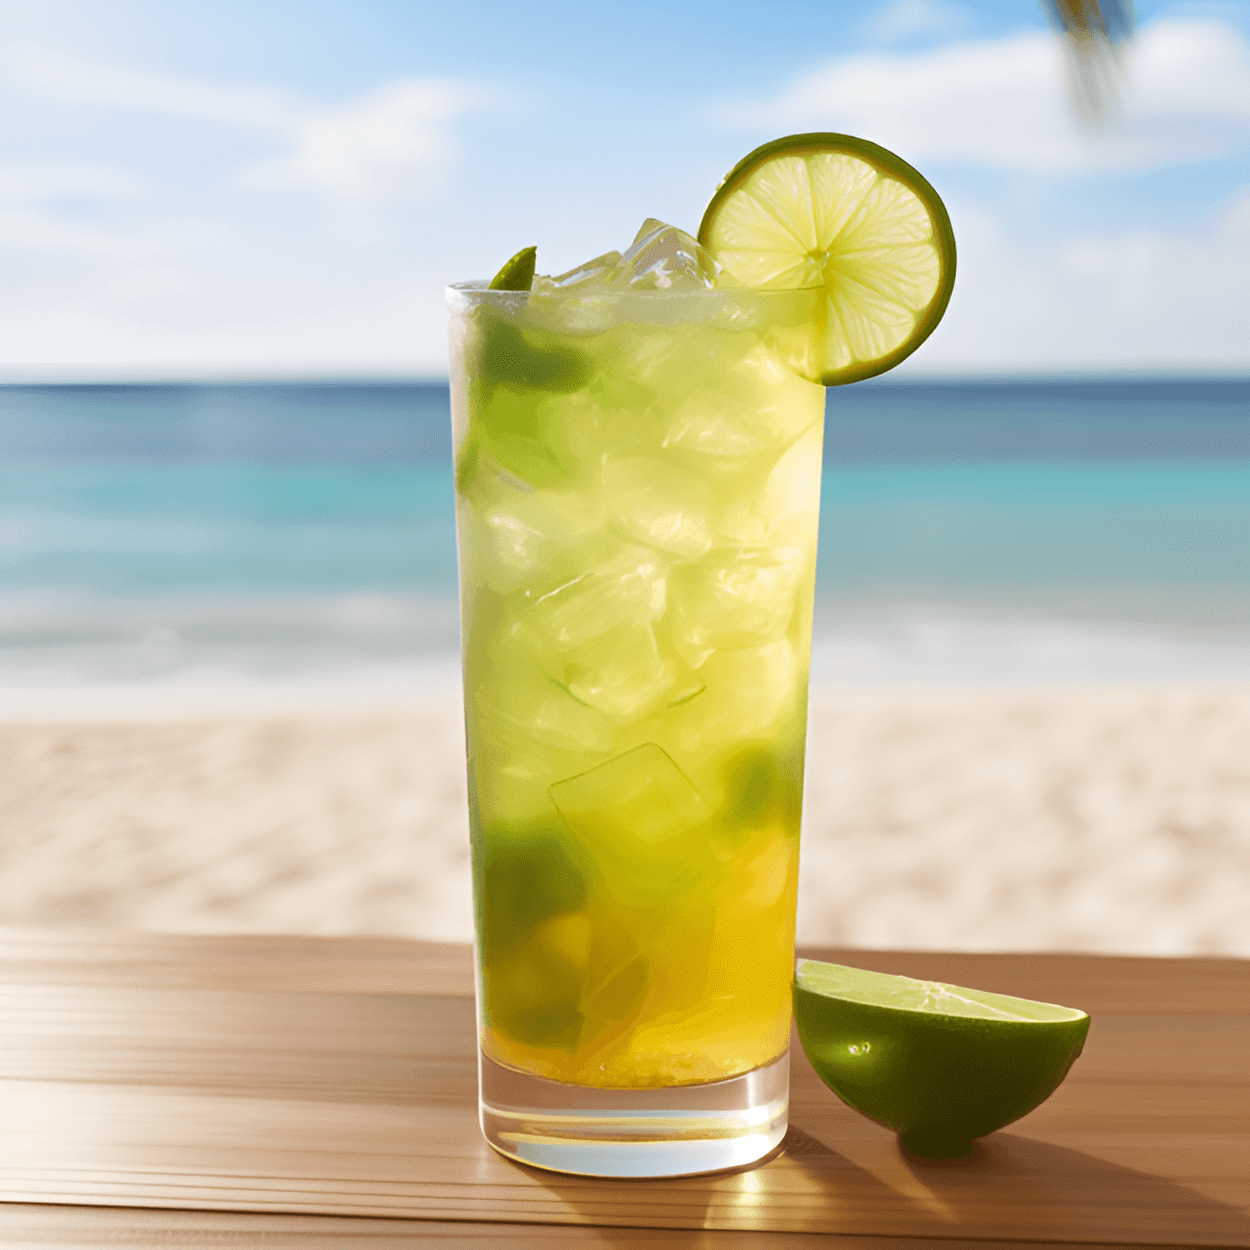 Mauby Cocktail Recipe - The Mauby cocktail is a unique blend of sweet and bitter flavors. The sweetness of the sugar and rum contrasts beautifully with the bitter, earthy taste of the mauby bark. The addition of lime juice adds a refreshing citrusy tang, making it a perfect drink for a hot summer day.